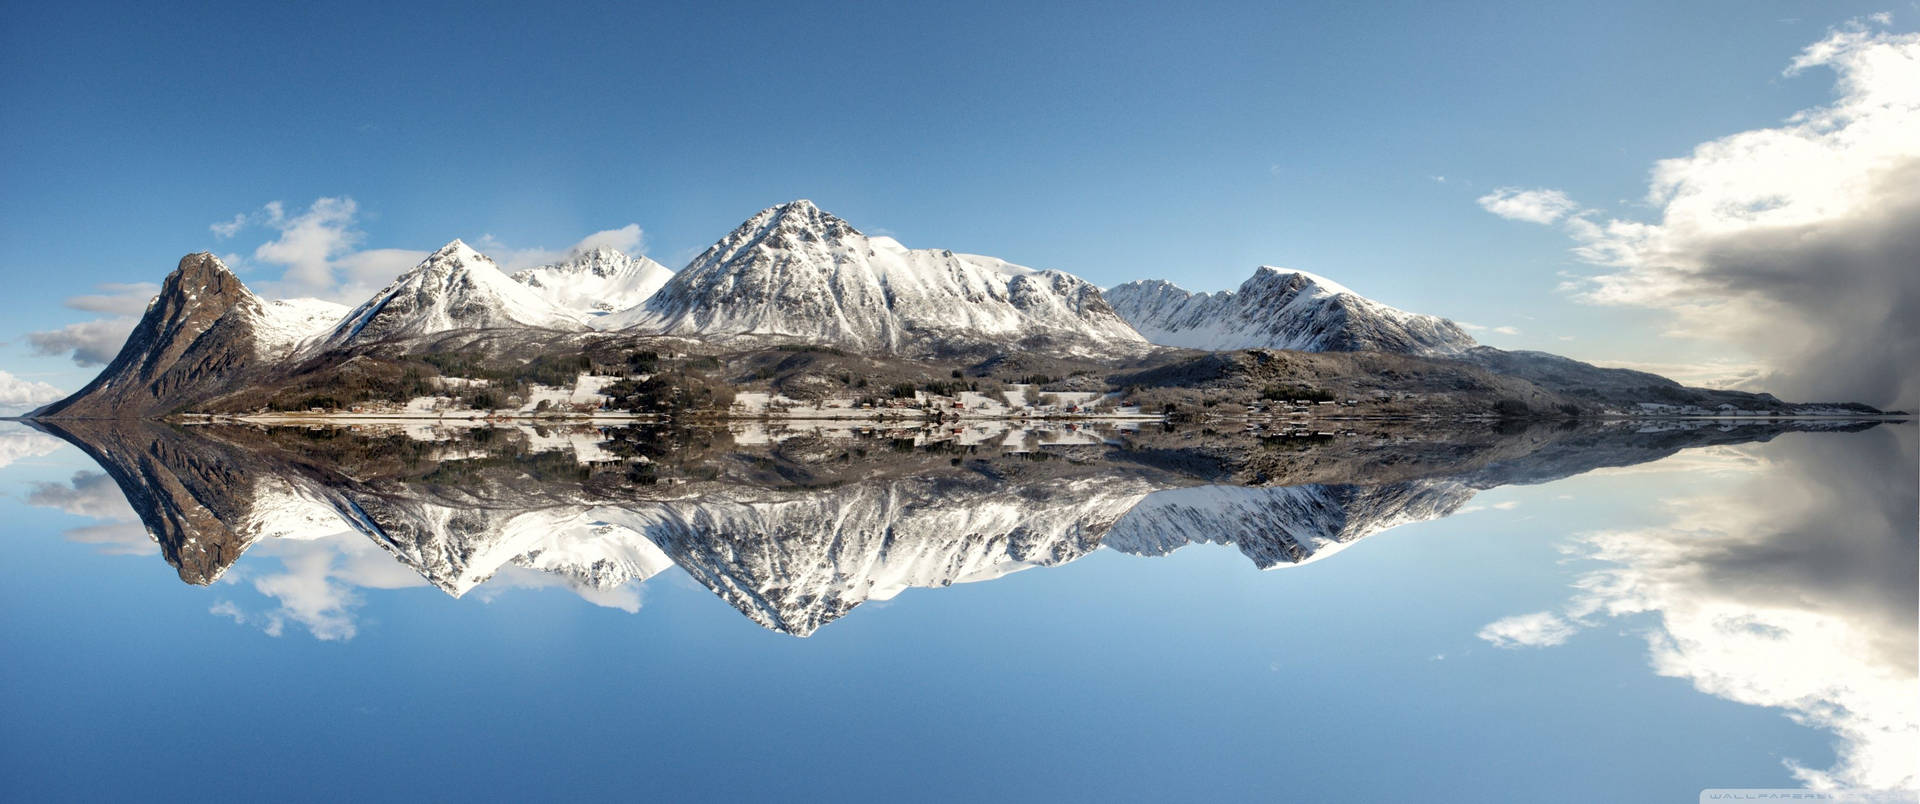 A Magnificent Reflection Of Snowy Mountains. Wallpaper